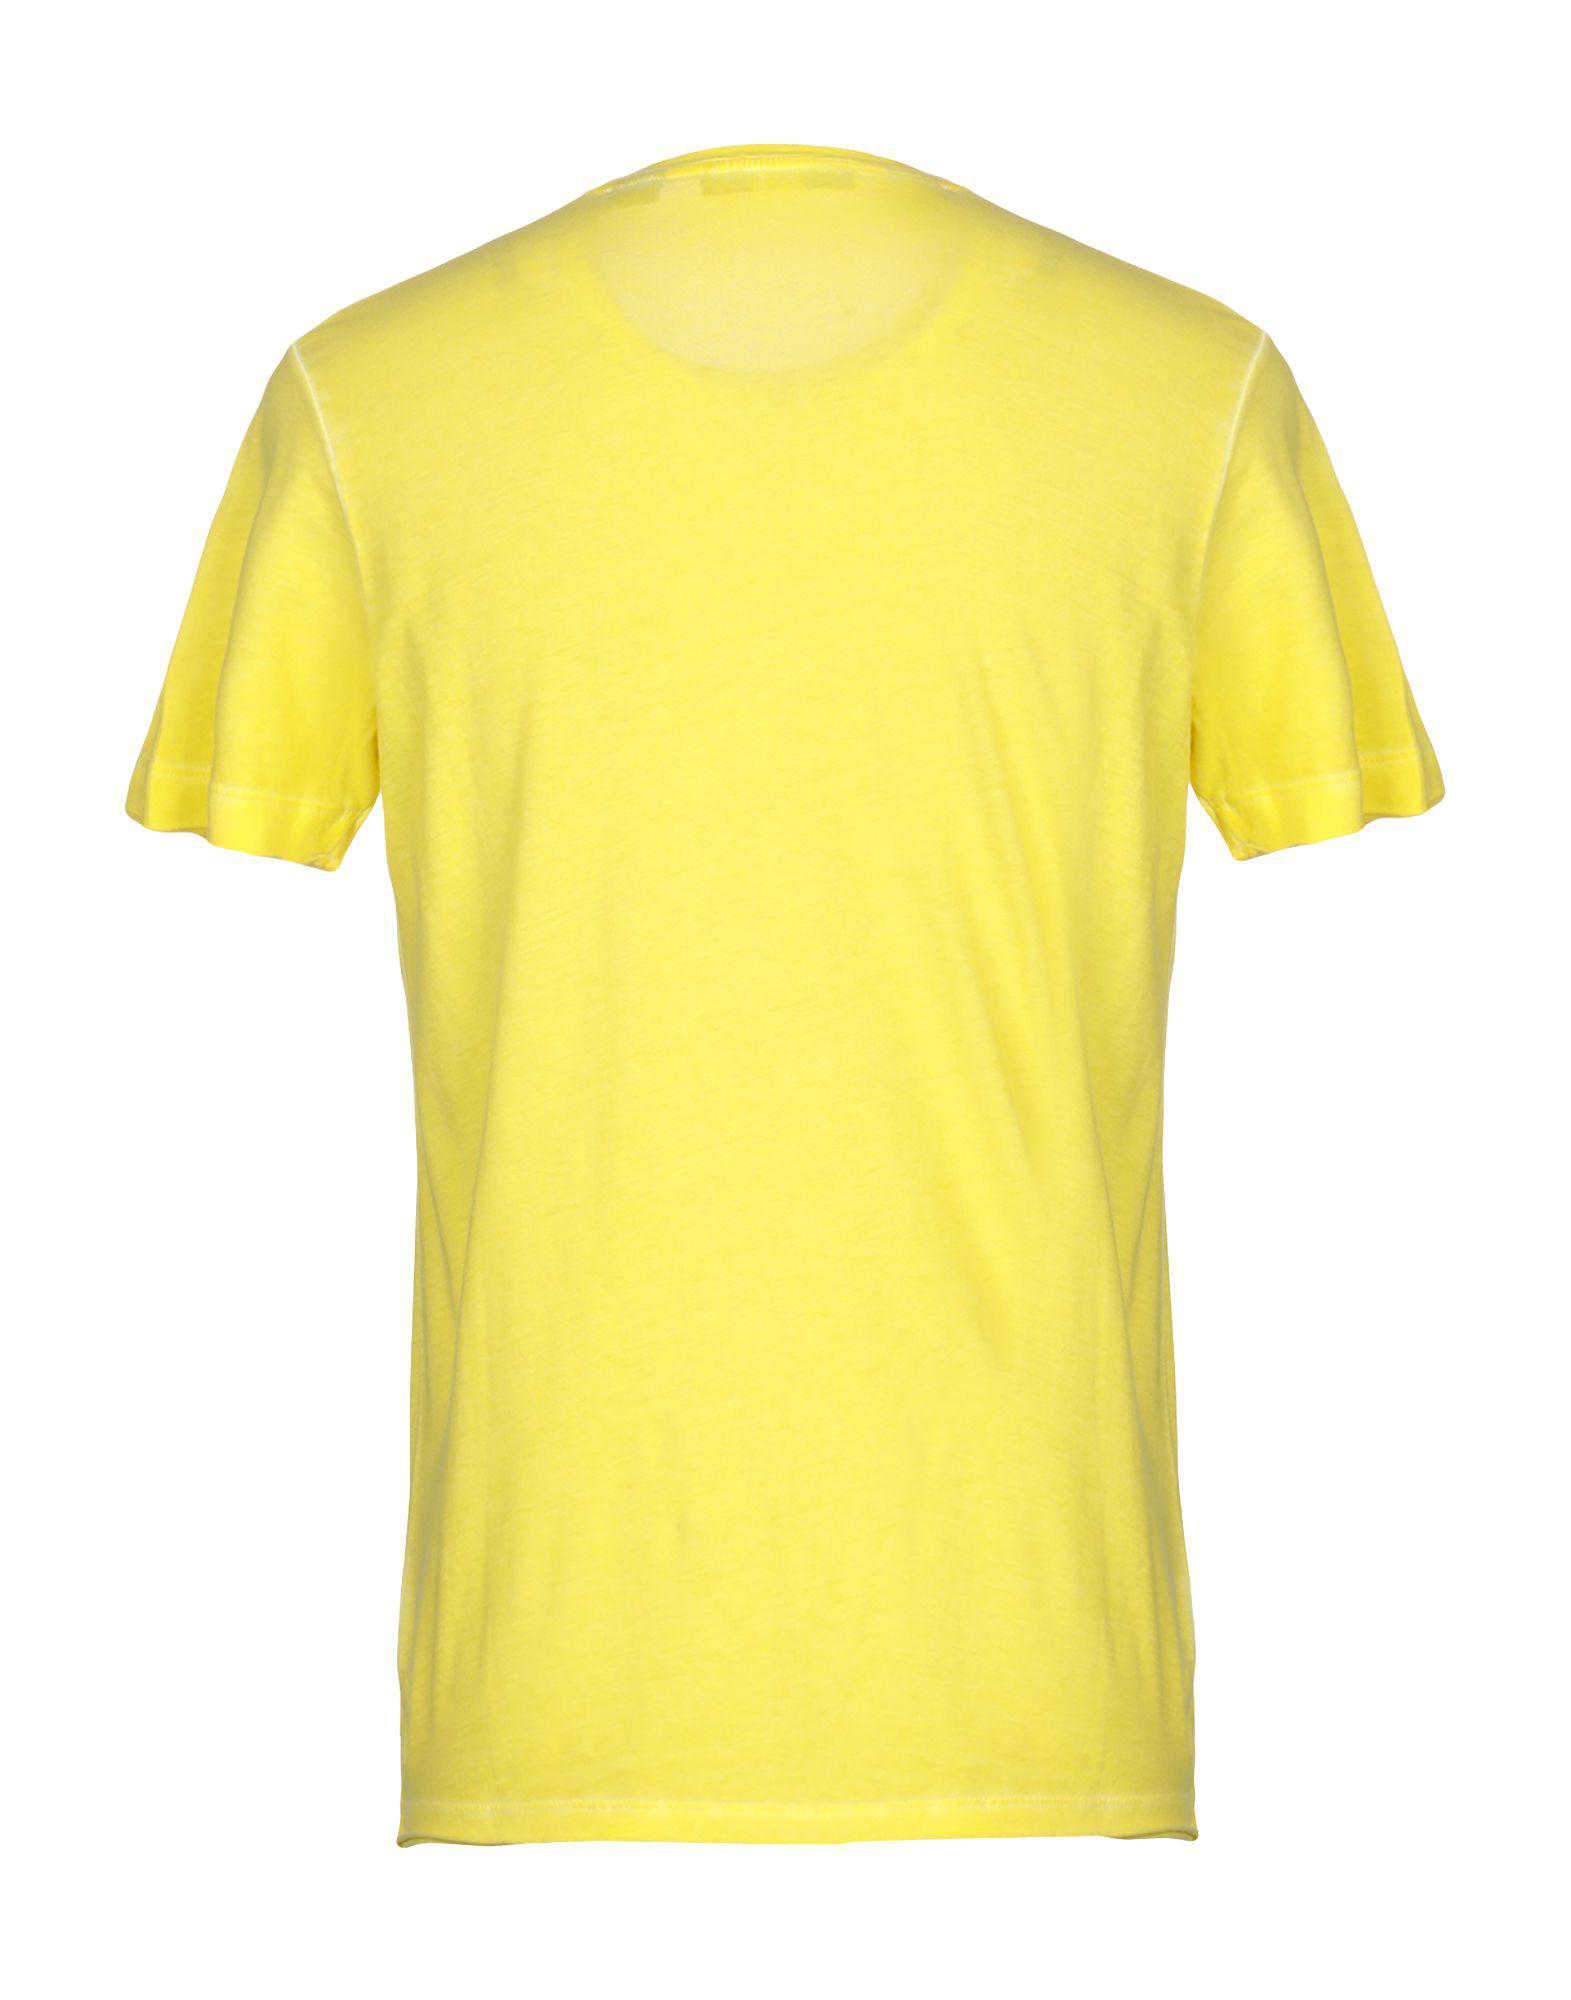 Guess Cotton T-shirt in Yellow for Men - Lyst